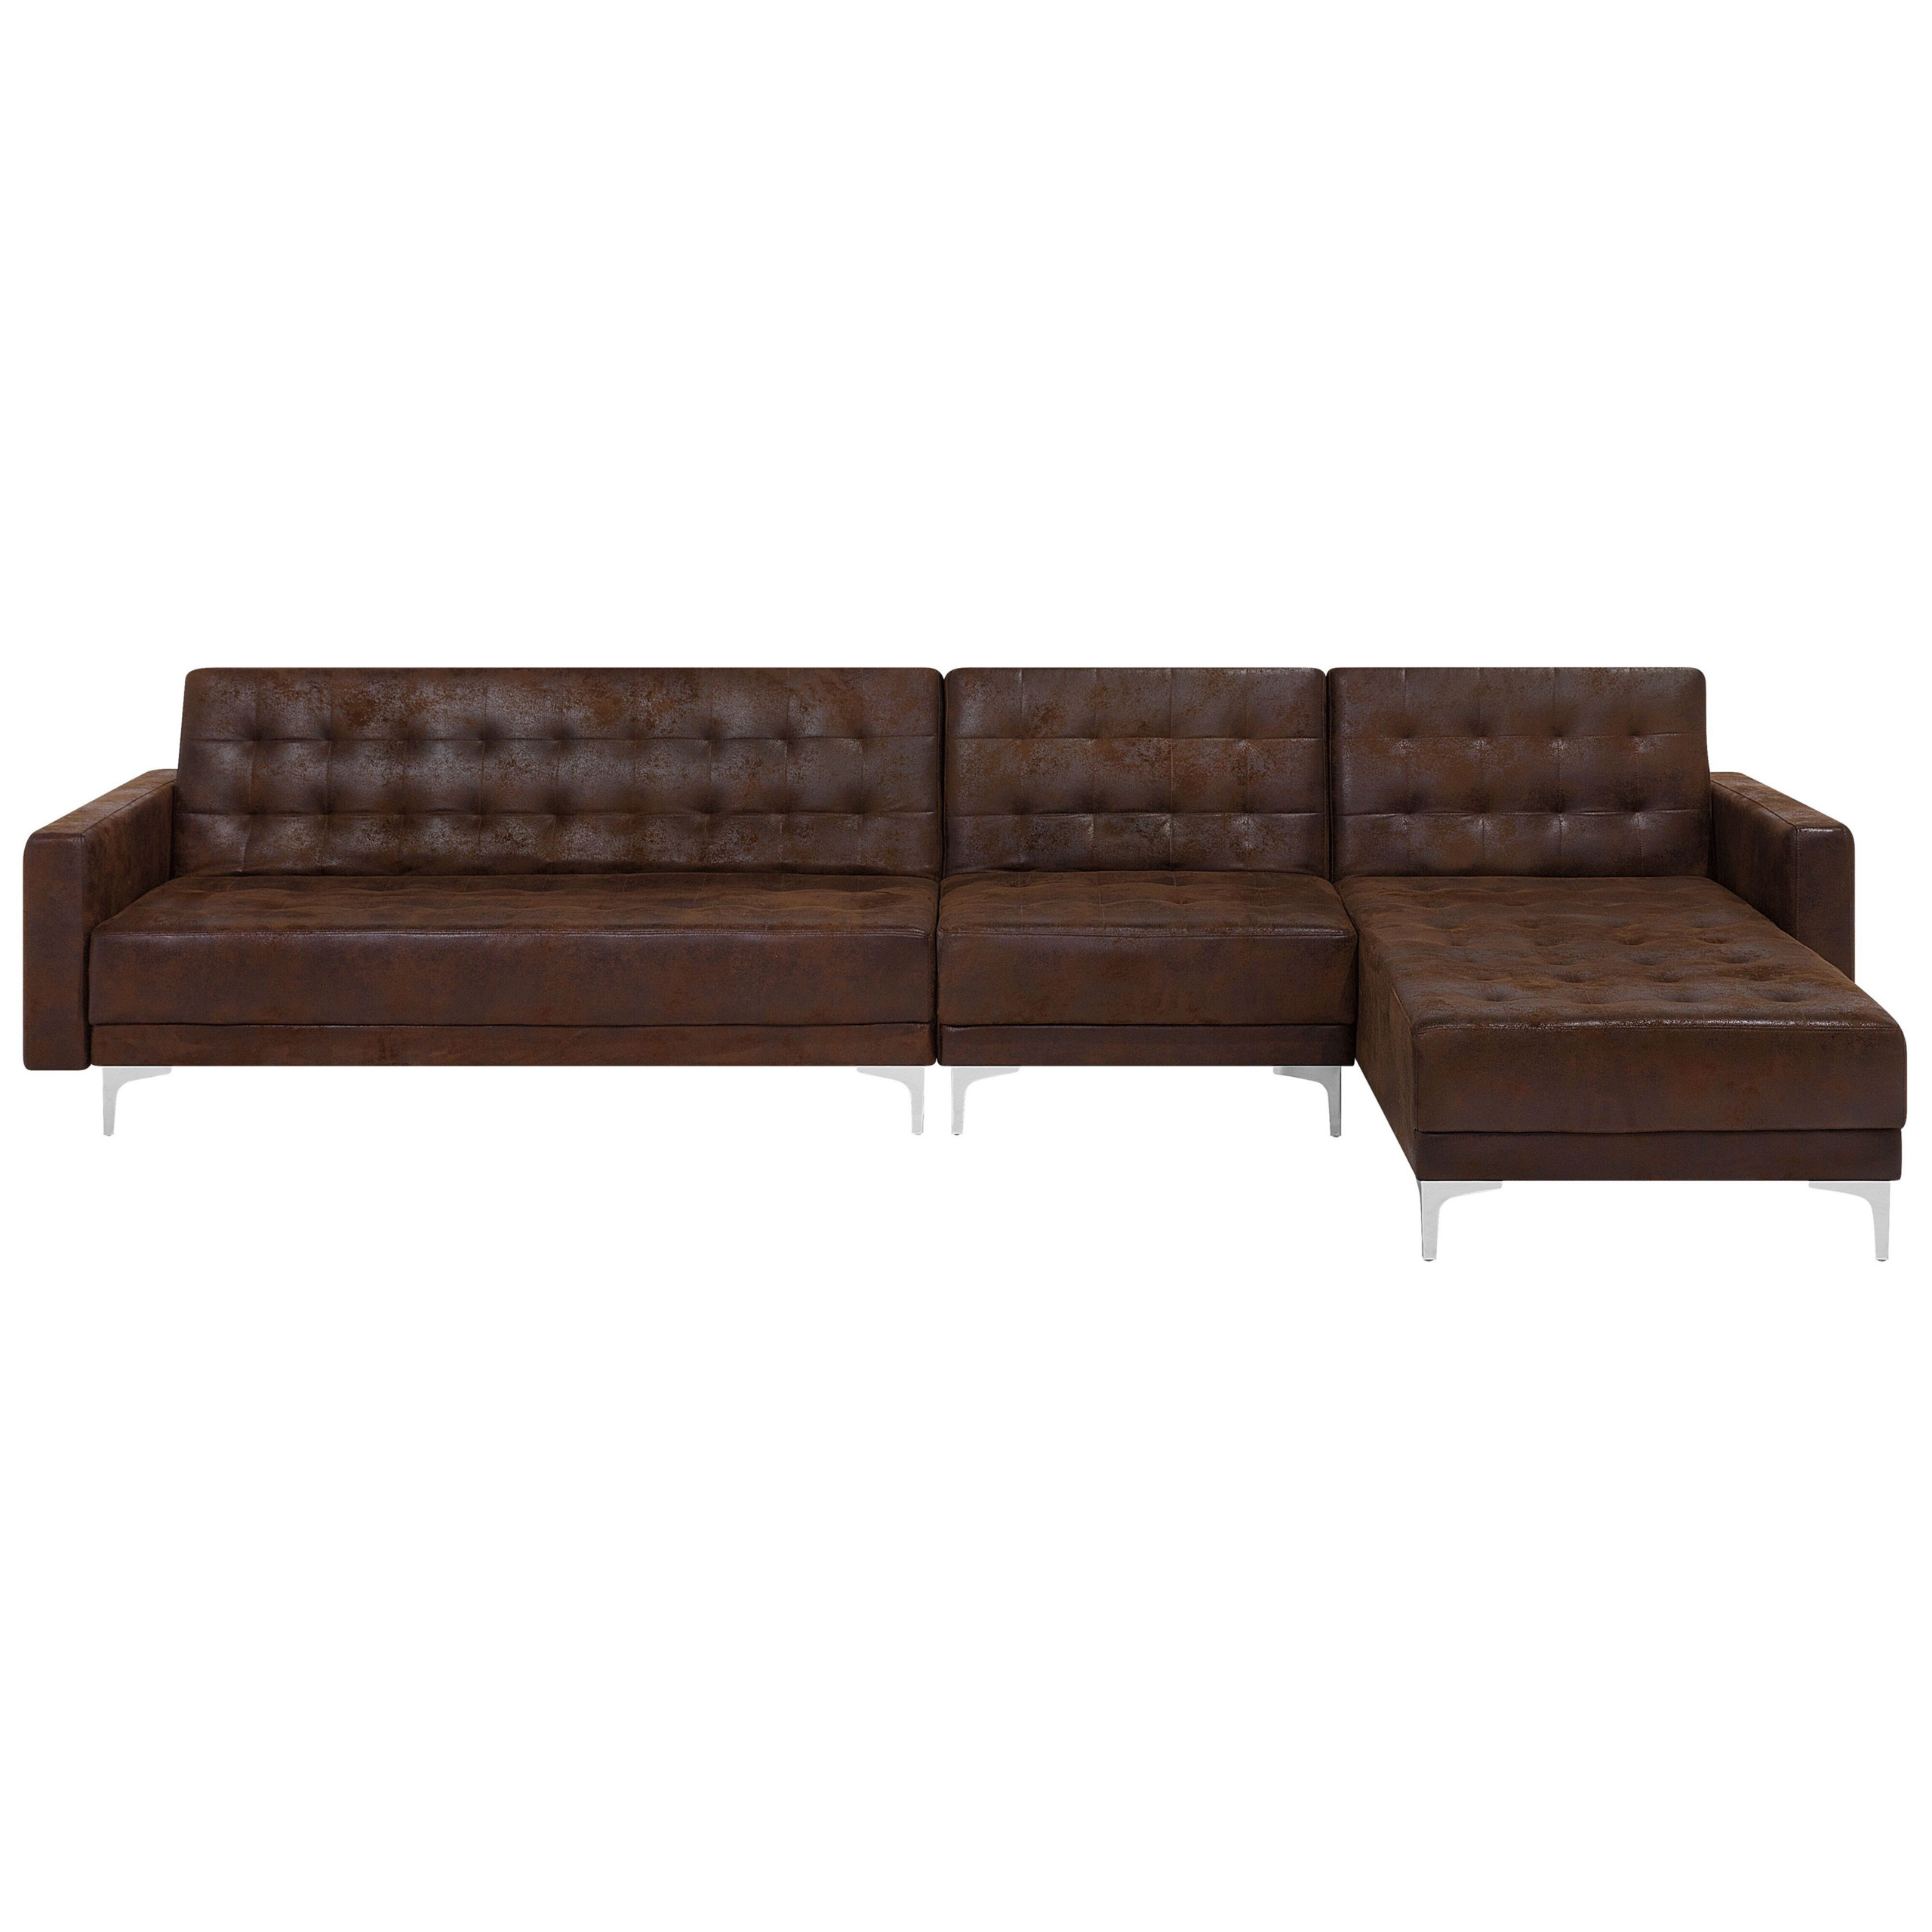 Beliani Corner Sofa Bed Brown Faux Leather Tufted Modern L-Shaped Modular 5 Seater Left Hand Chaise Longue